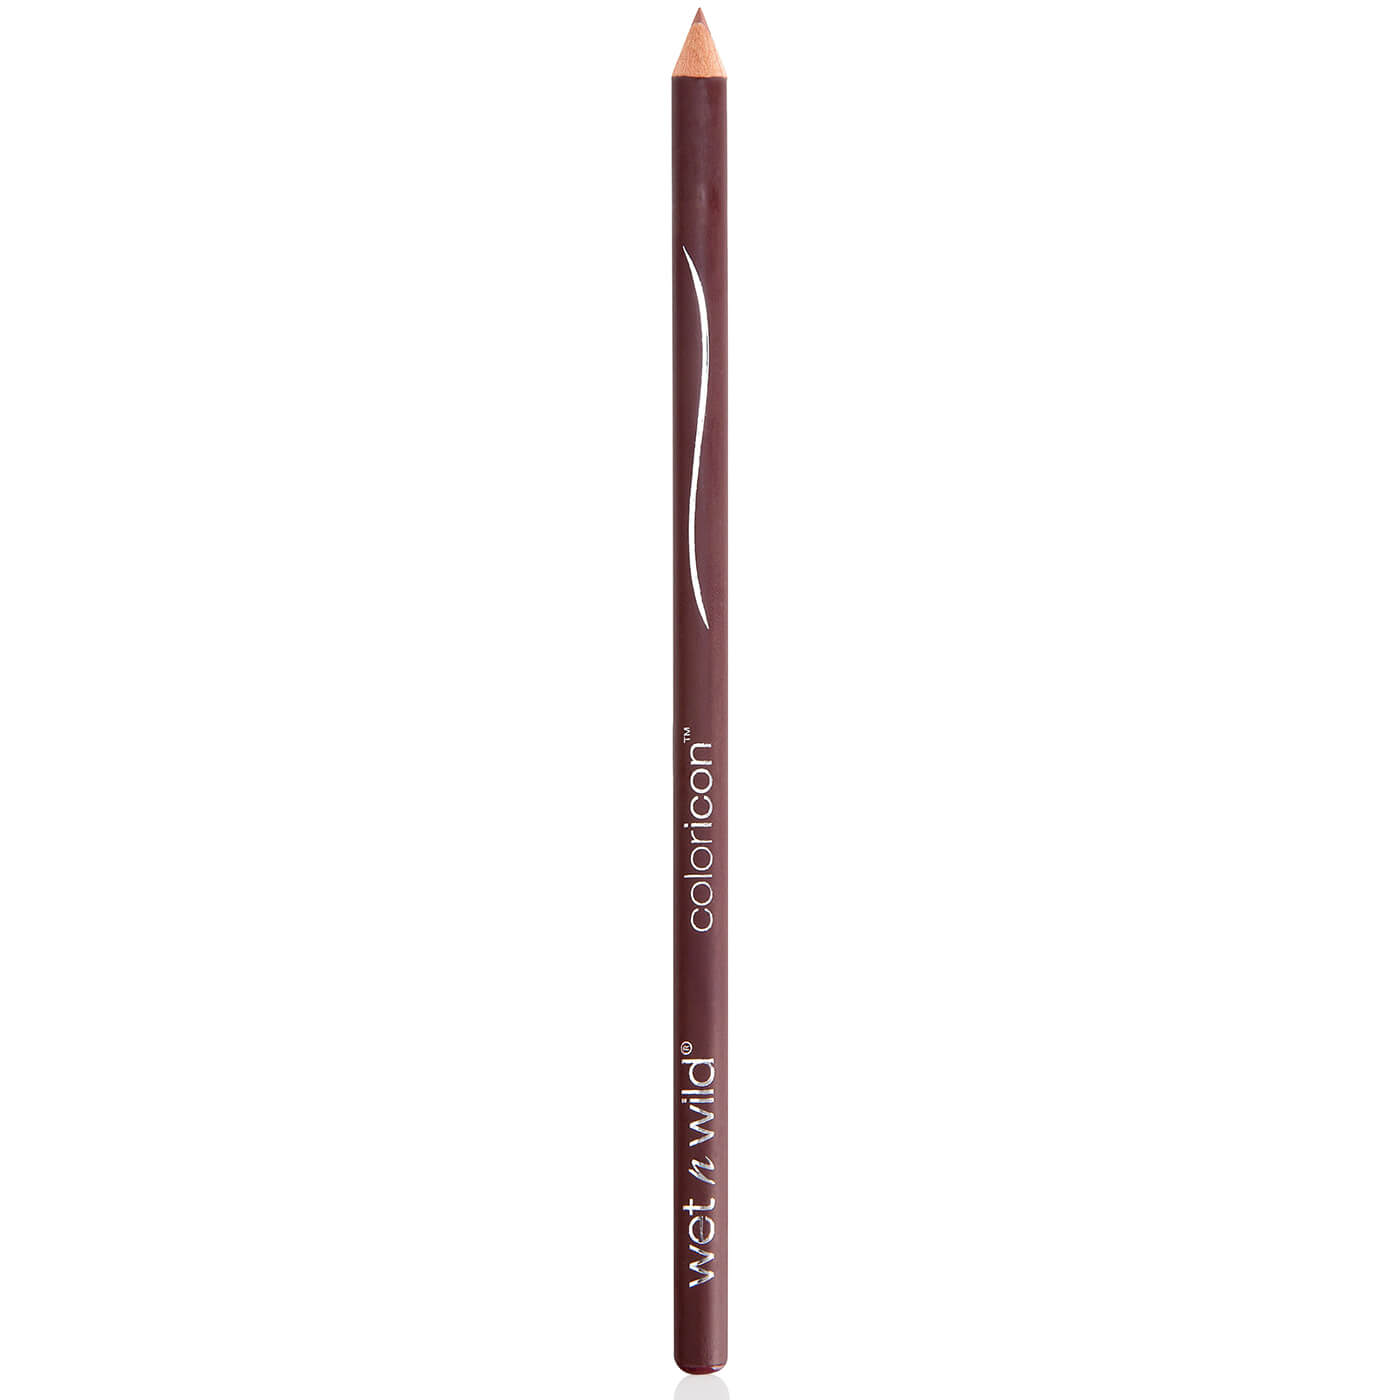 wet n wild coloricon Lipliner Pencil 1.4g (Various Shades) - Willow